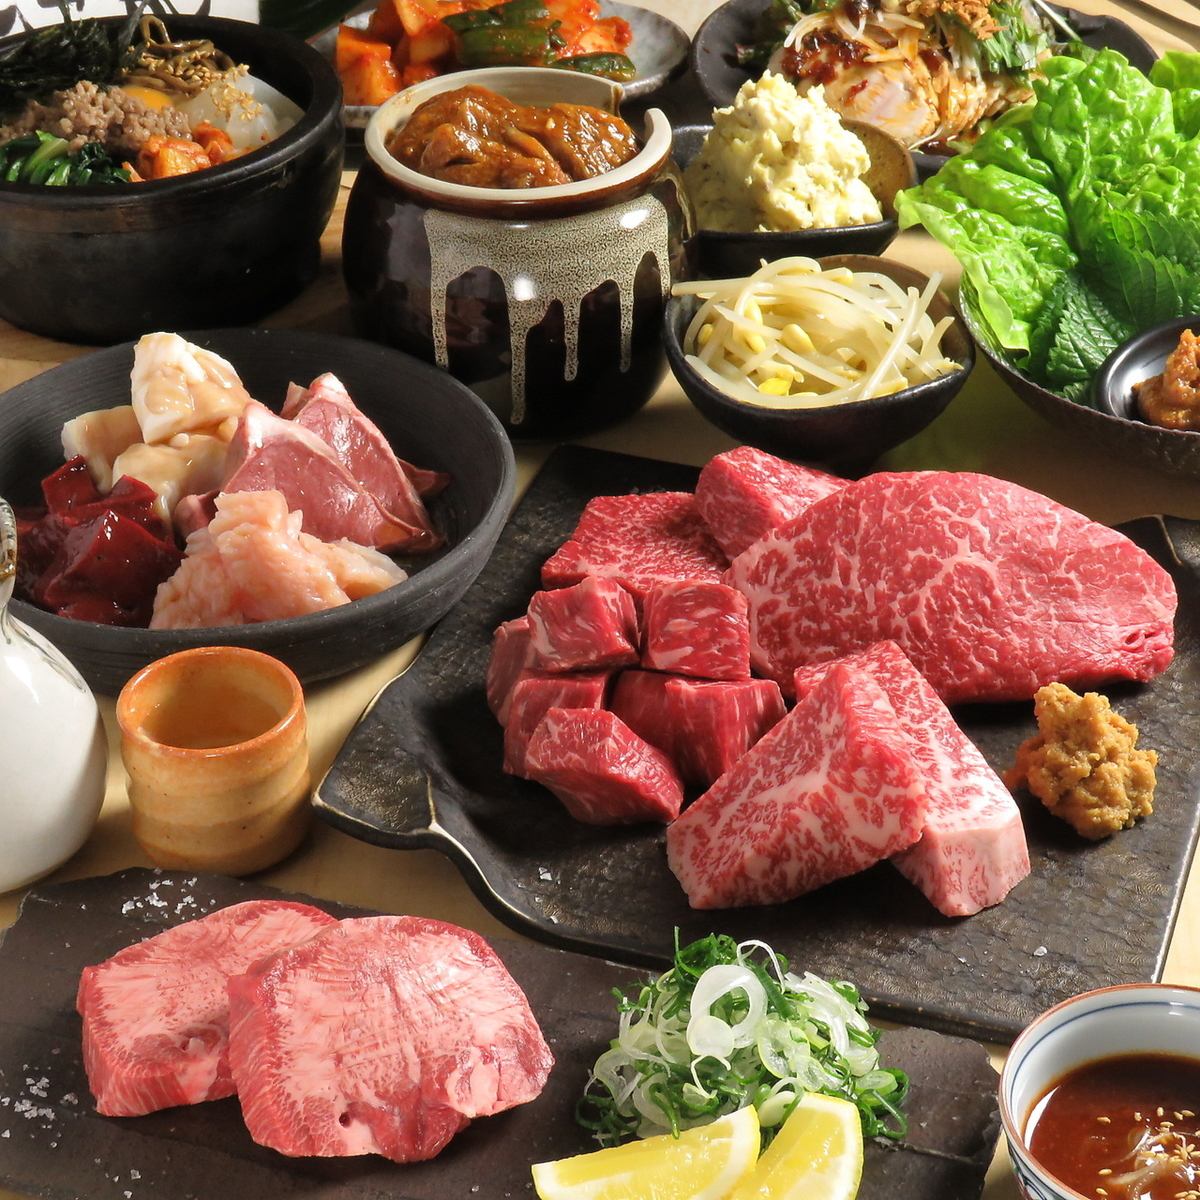 A yakiniku restaurant that uses Kyoto beef, which features high-quality red meat!